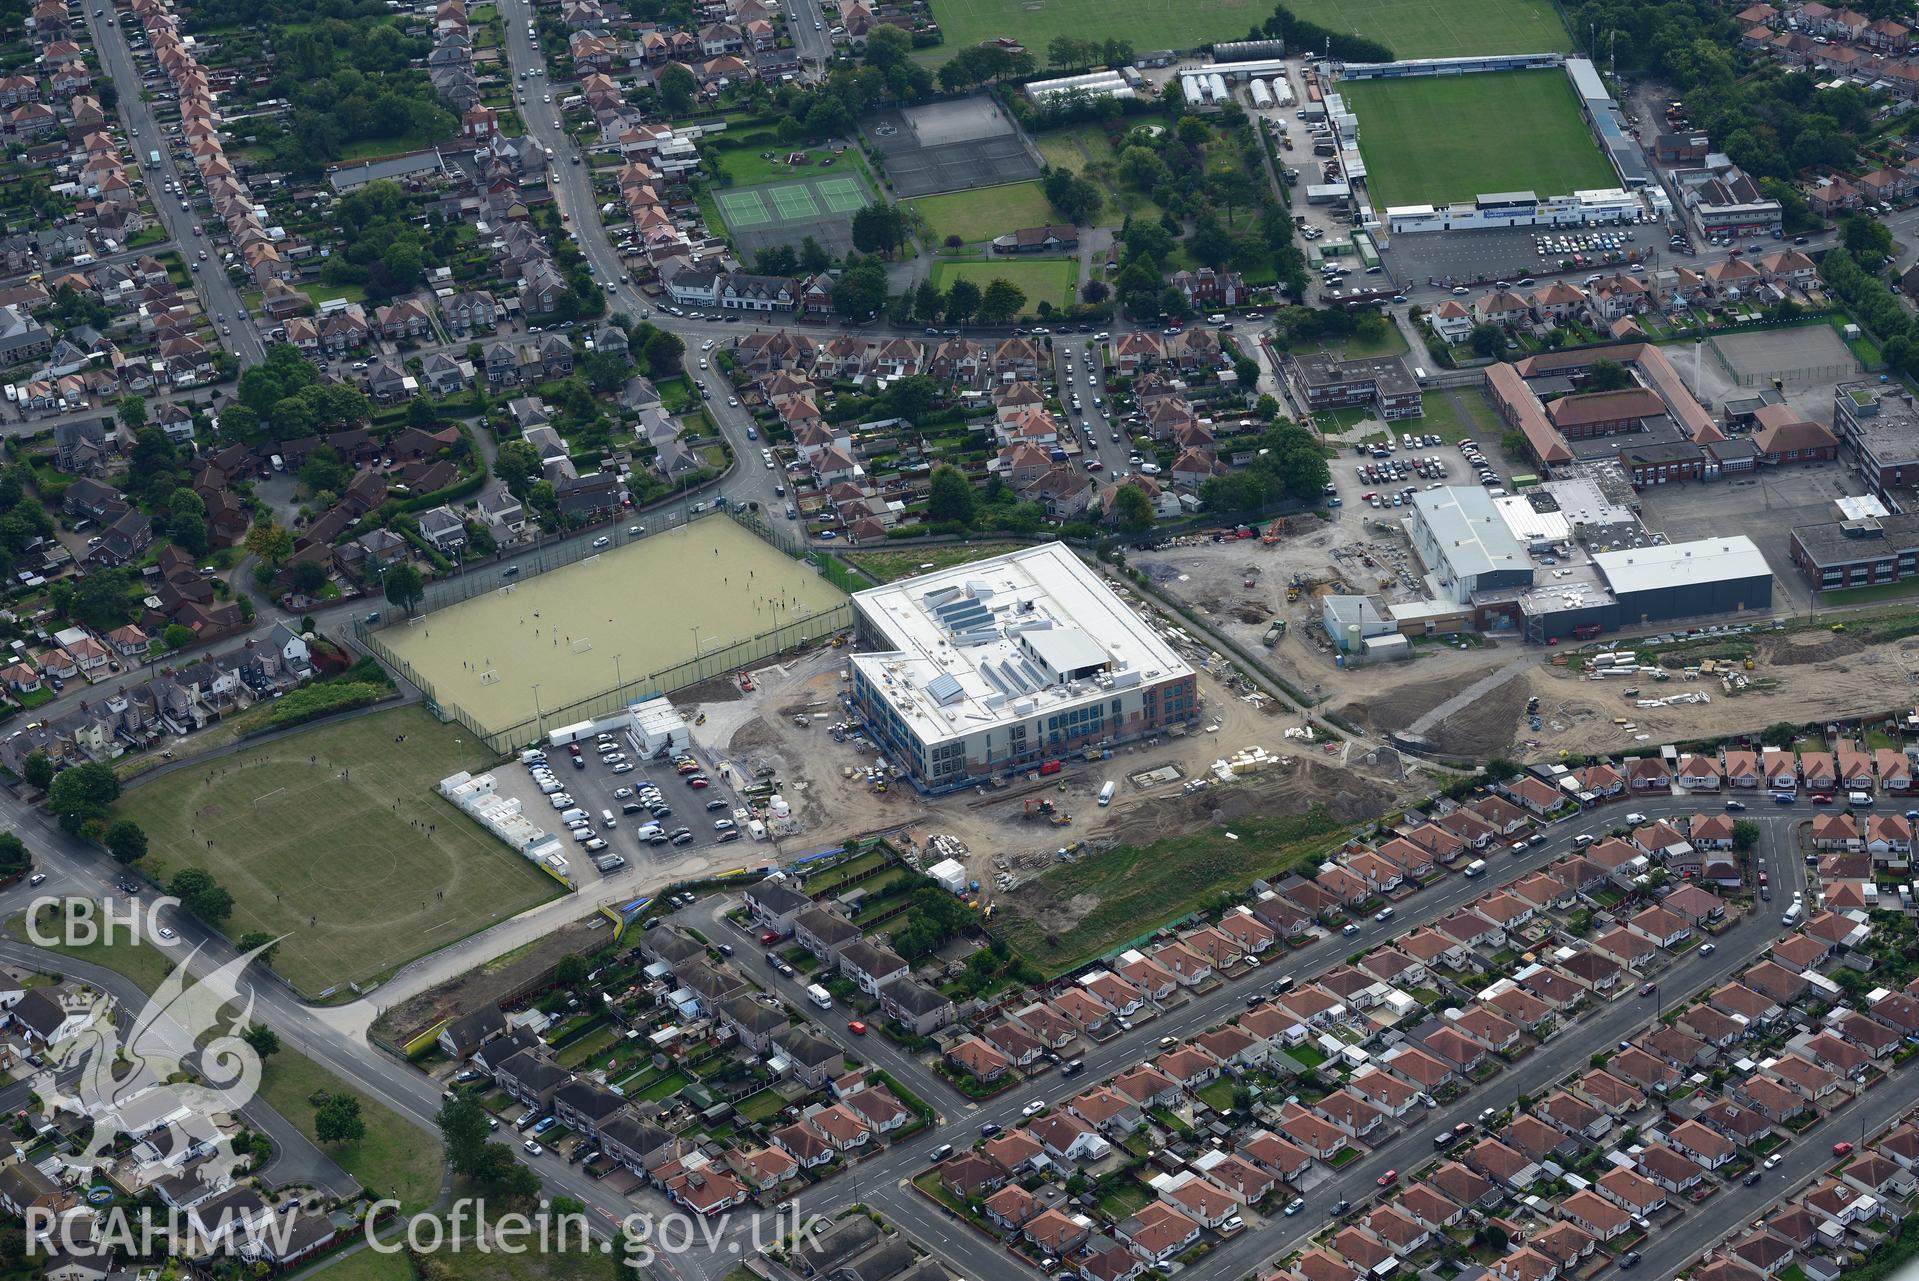 The old high school, the new high school (under construction) and the Botanical Gardens, Rhyl. Oblique aerial photograph taken during the Royal Commission's programme of archaeological aerial reconnaissance by Toby Driver on 11th September 2015.